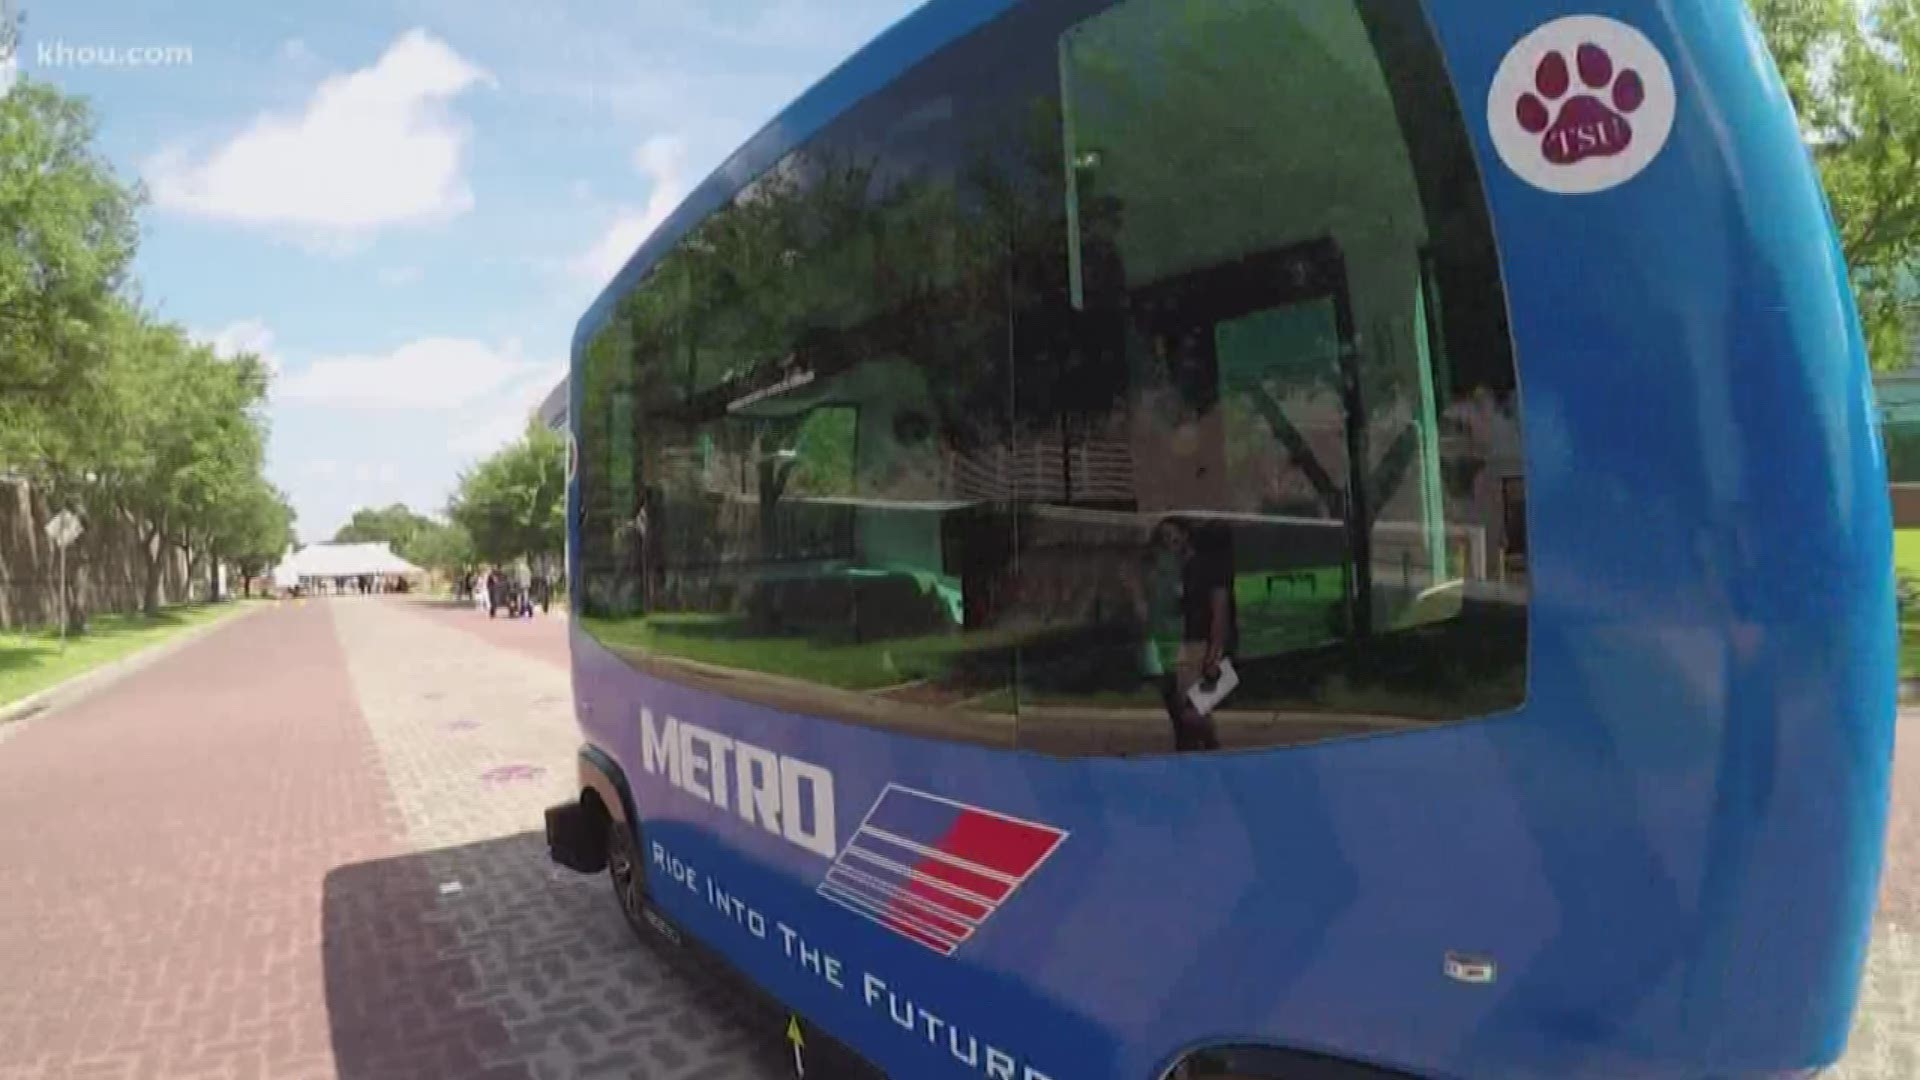 METRO officials say this technology could be used in office parks, neighborhoods, and the Texas Medical Center.